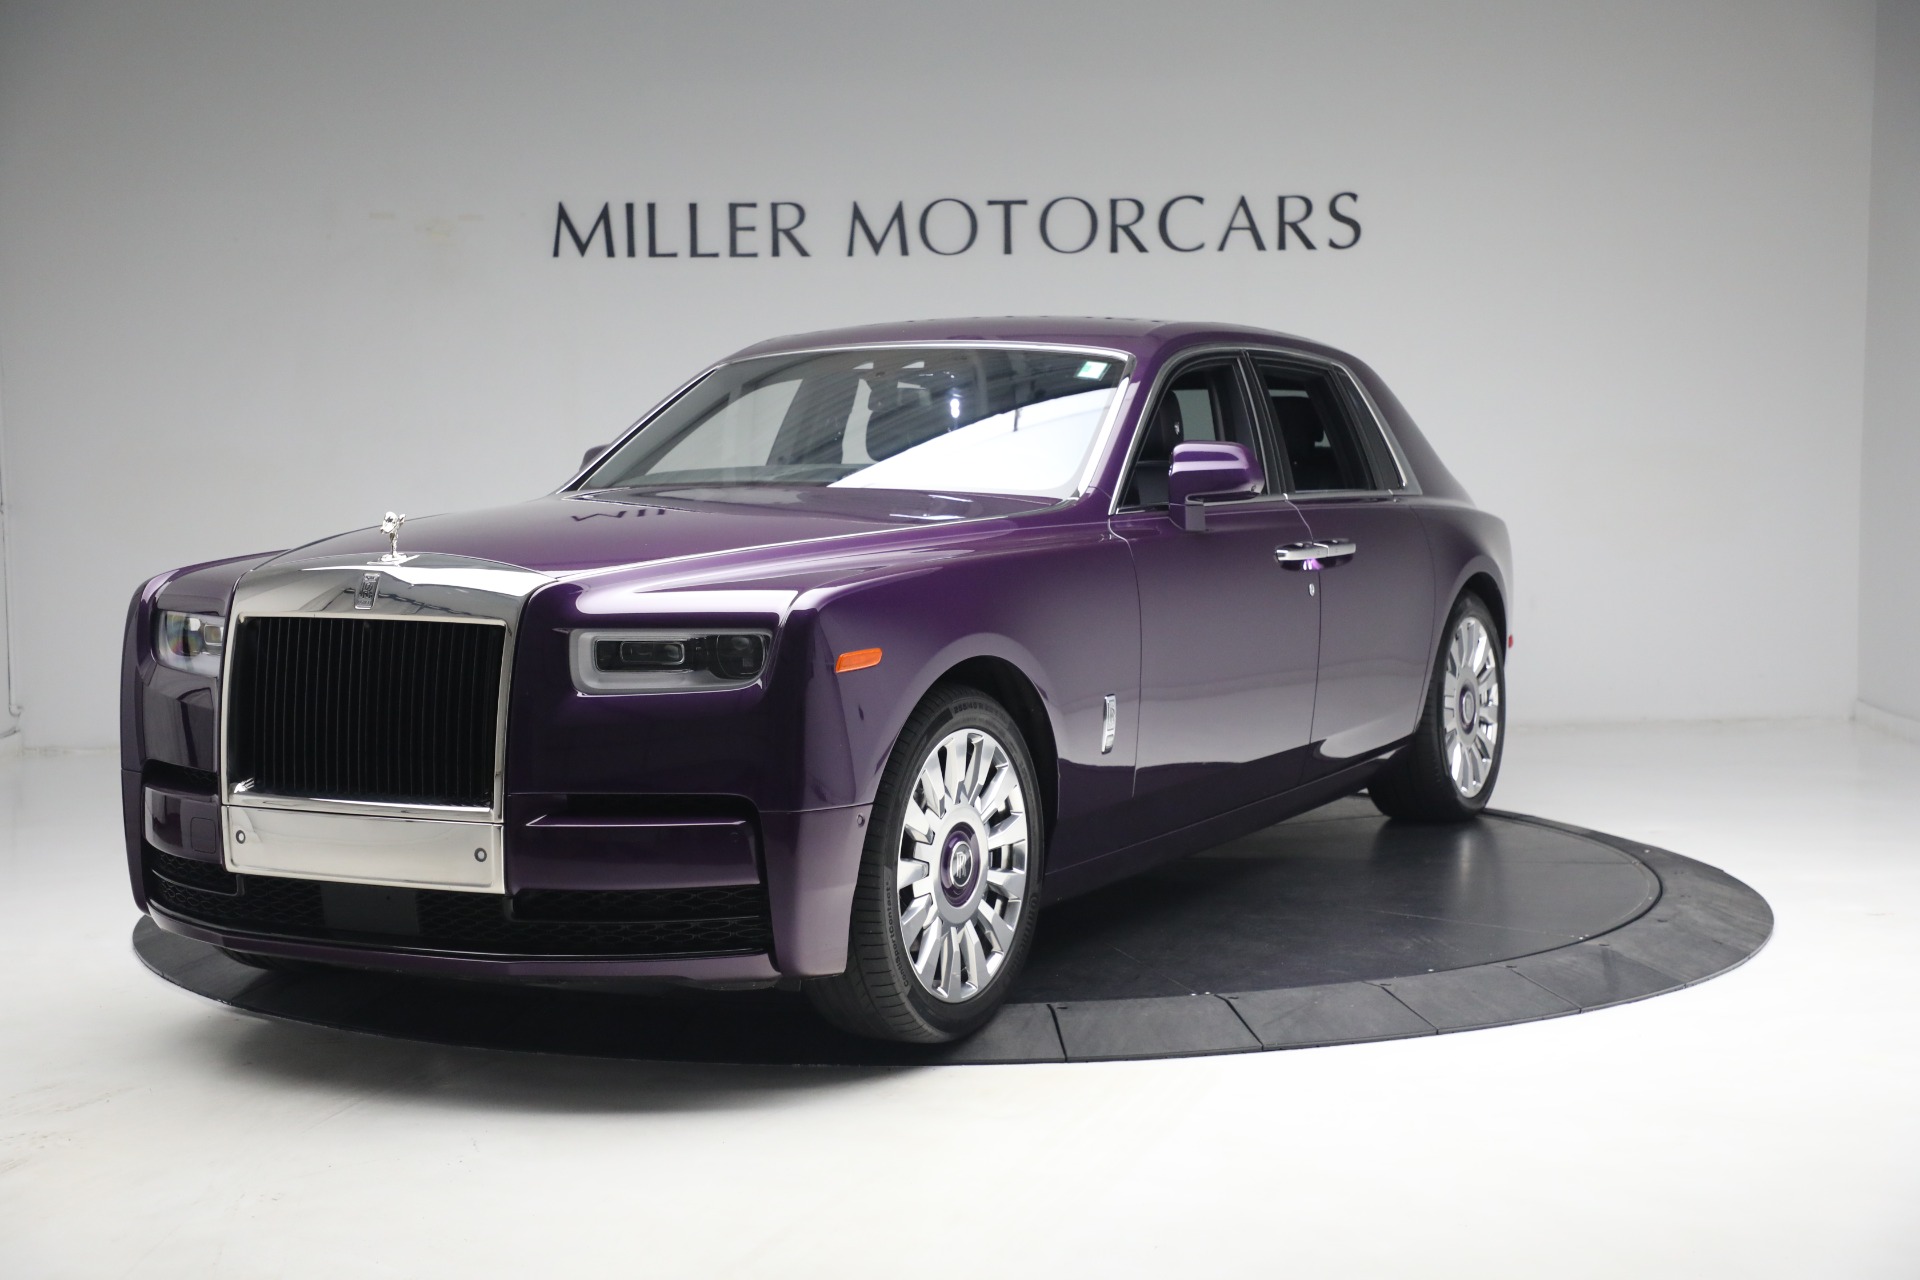 Used 2020 Rolls-Royce Phantom for sale $394,895 at Pagani of Greenwich in Greenwich CT 06830 1